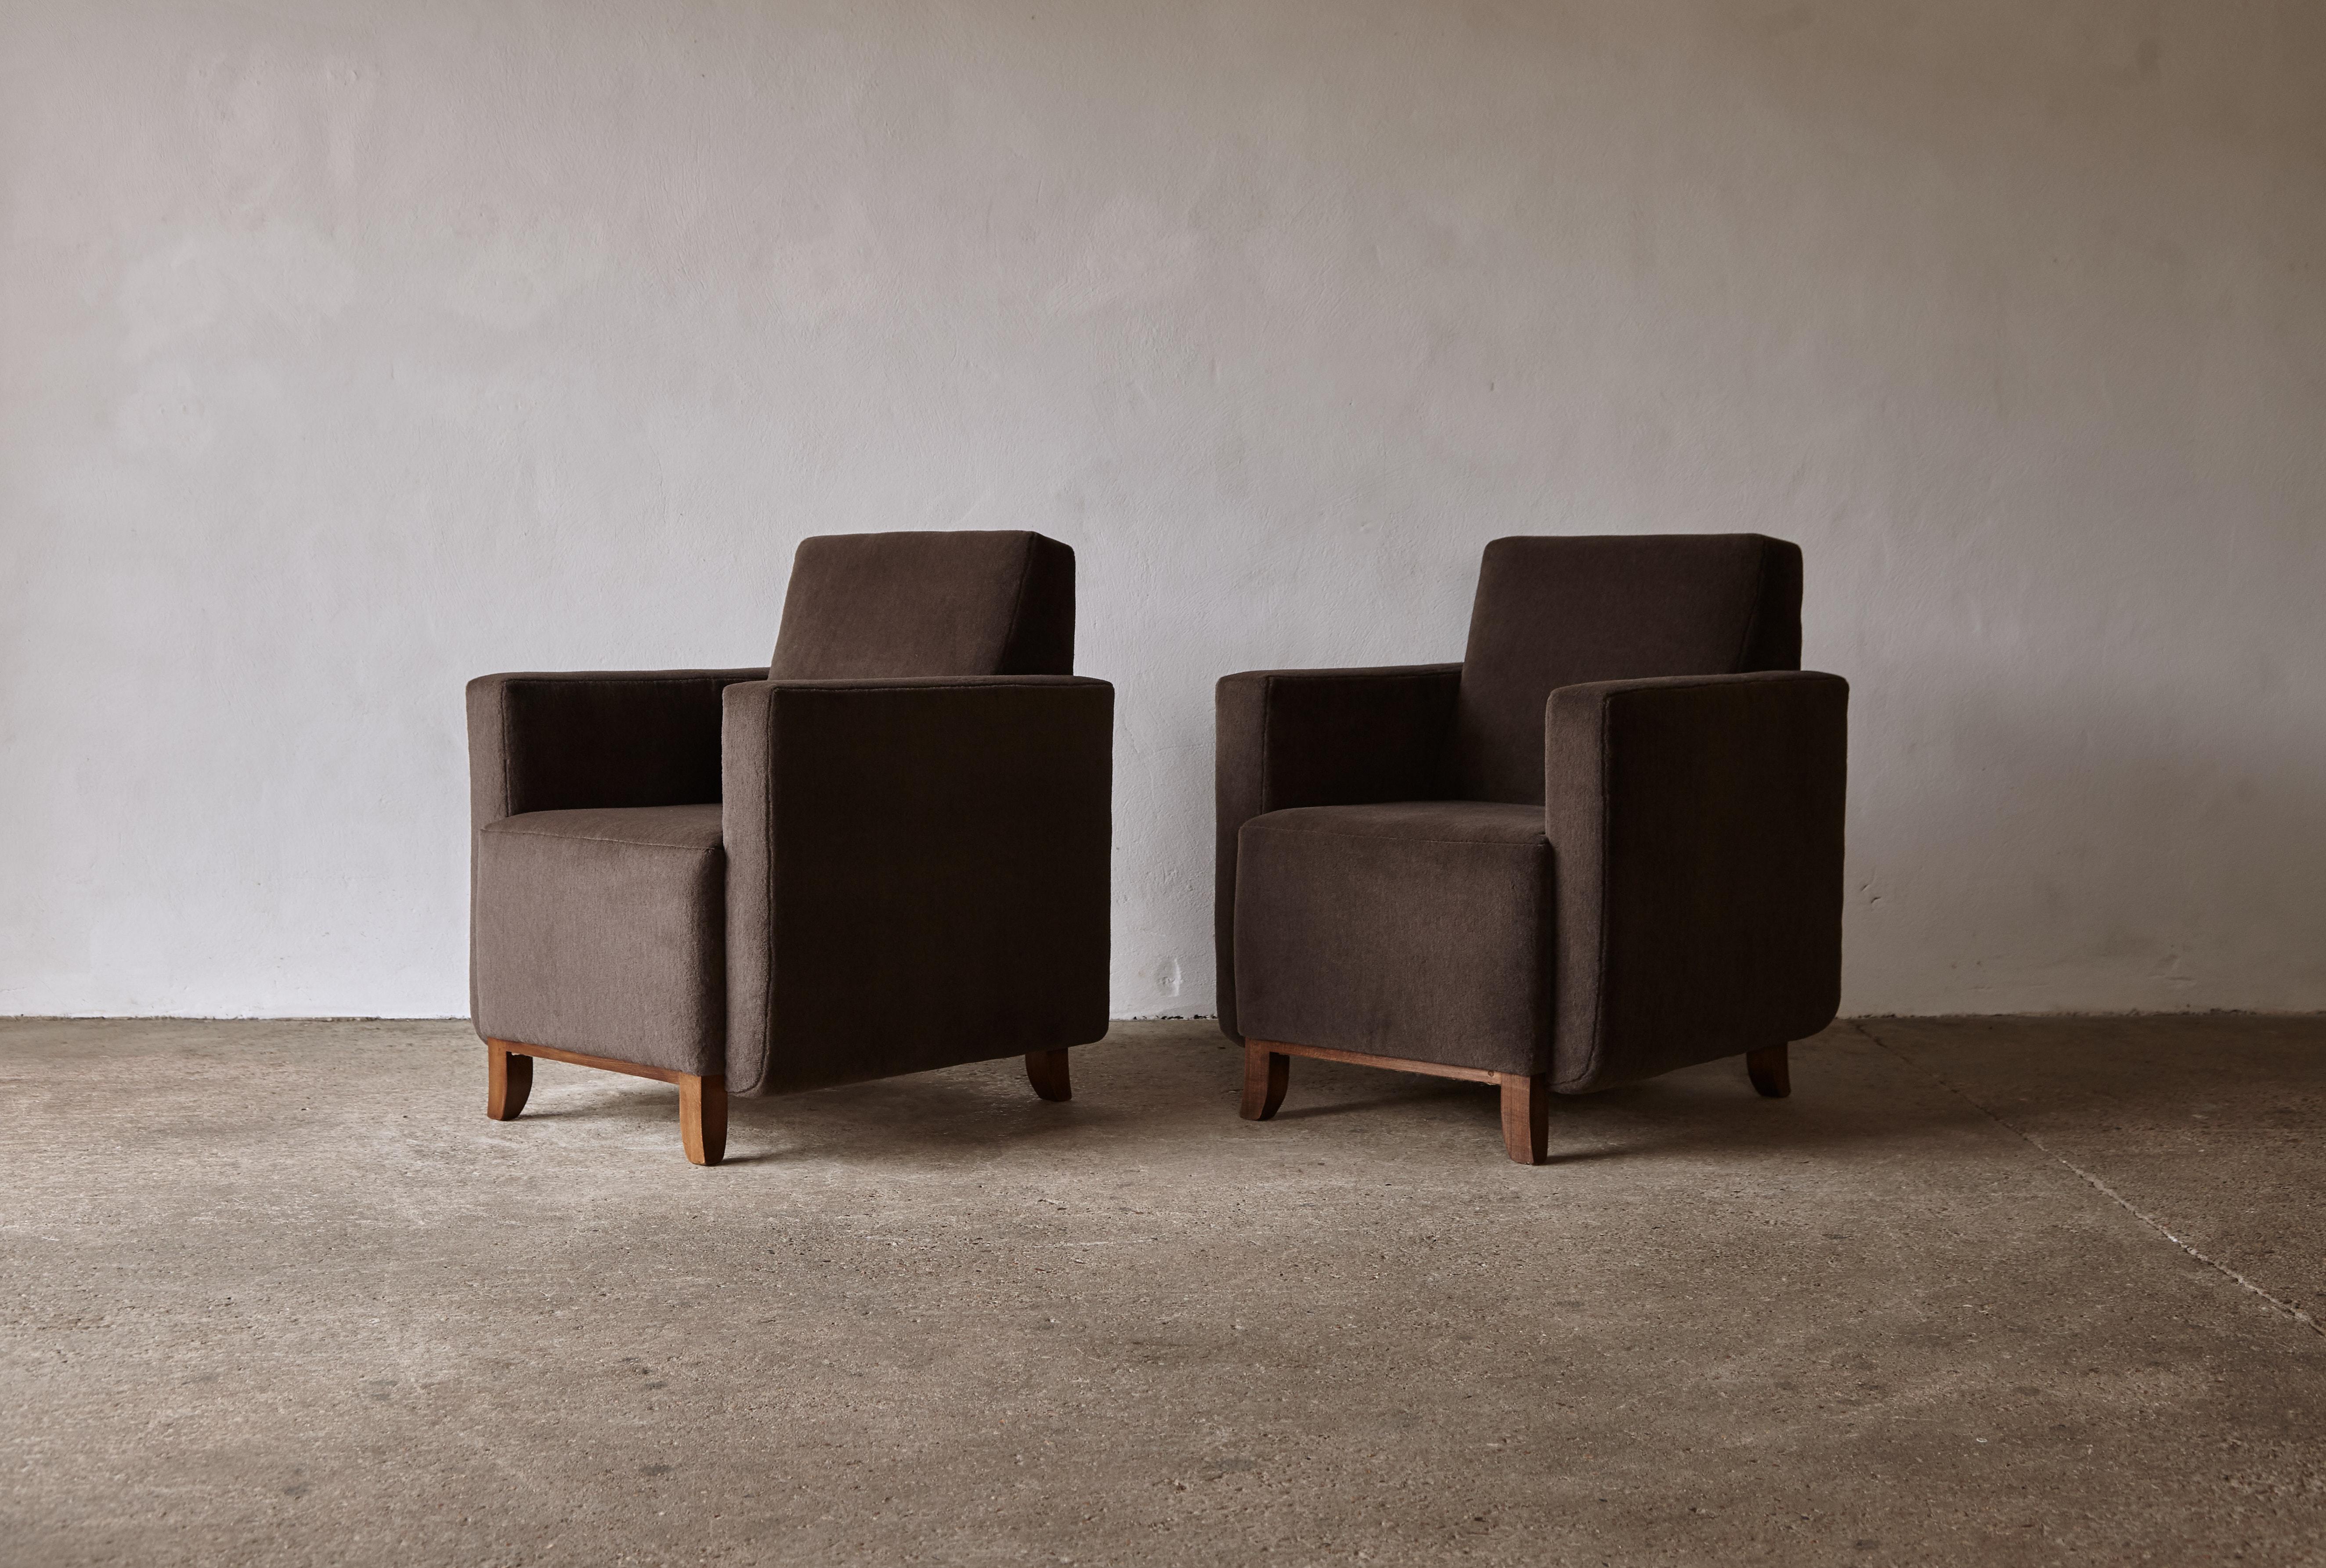 An elegant pair of square armed modern club chairs. High quality hand-made beech frames and newly upholstered in a dark brown / grey premium 100% alpaca. Fast shipping worldwide.




UK customers please note - displayed prices are exclusive of